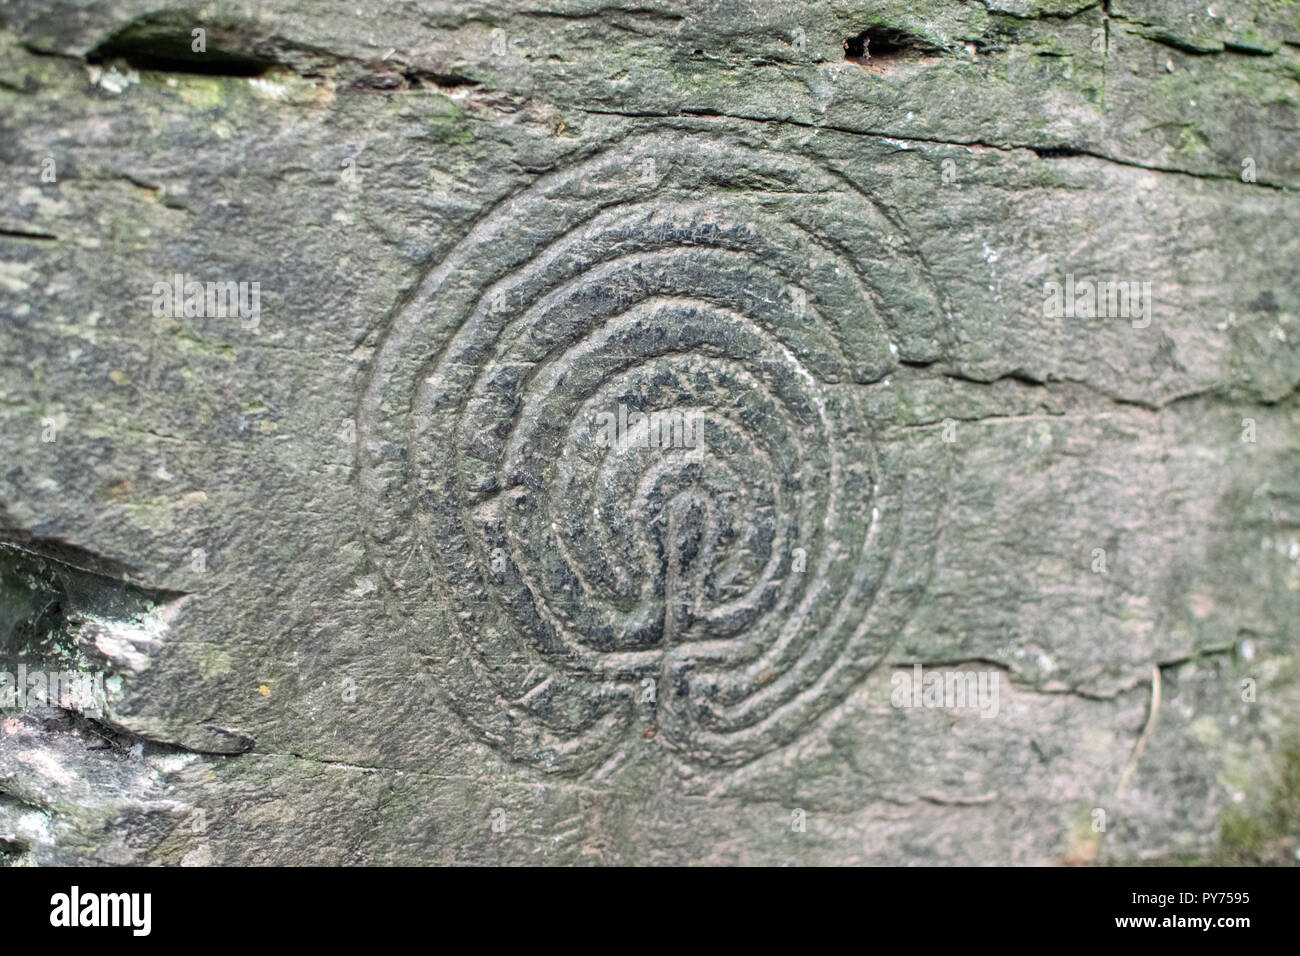 Bronze Age Labyrinth Rock Carvings at Rocky Valley, Between Boscastle and Tintagel, Cornwall UK Stock Photo